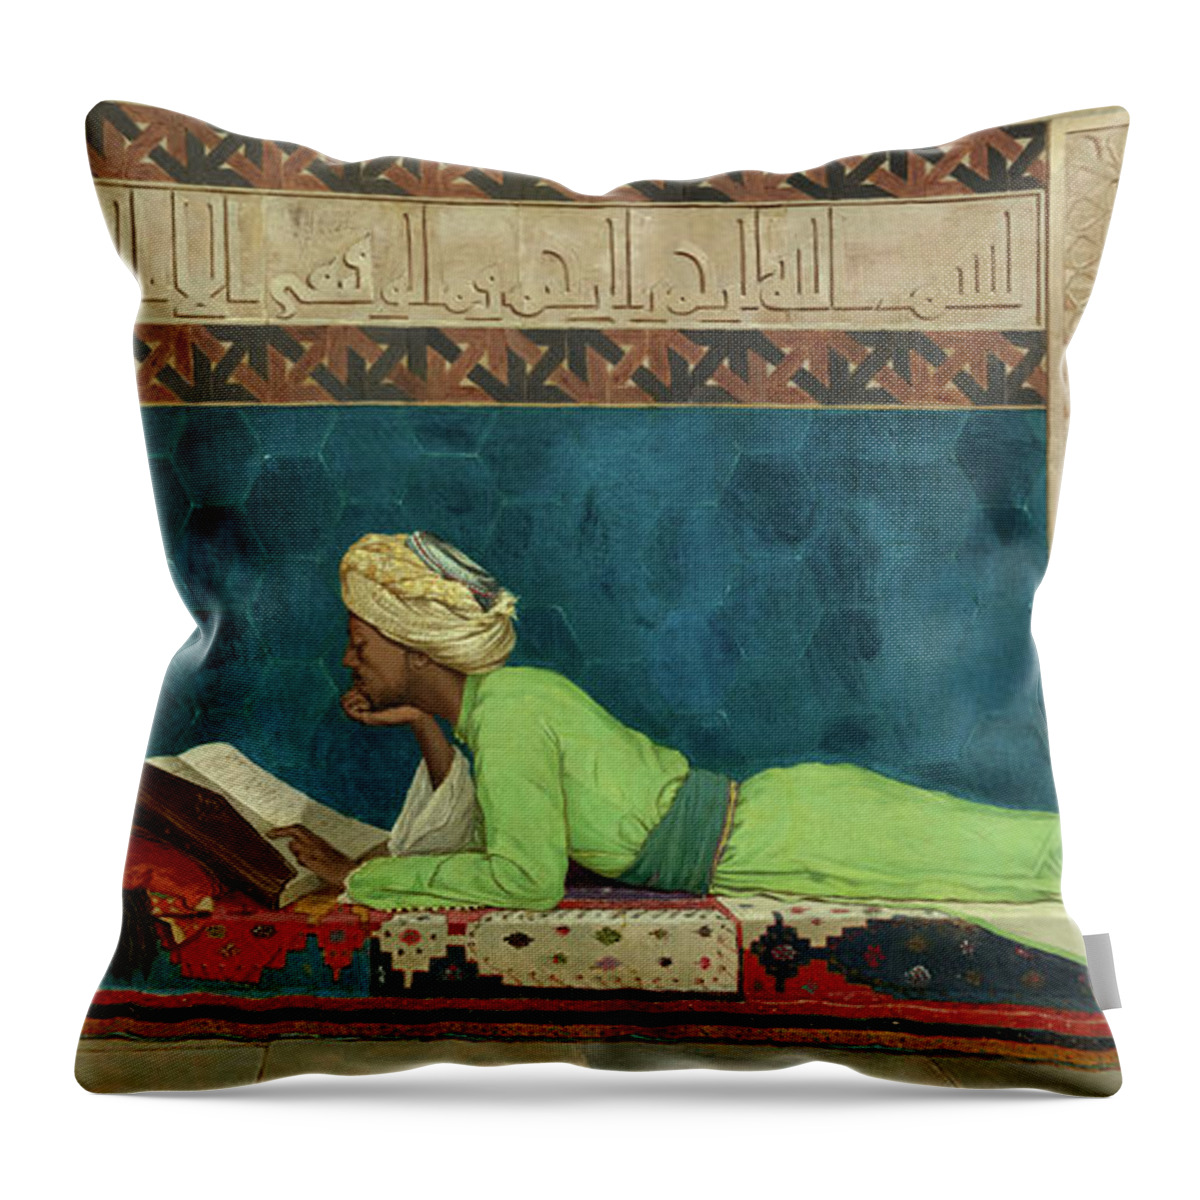 The Scholar Throw Pillow featuring the painting The Scholar by Osman Hamdi Bey